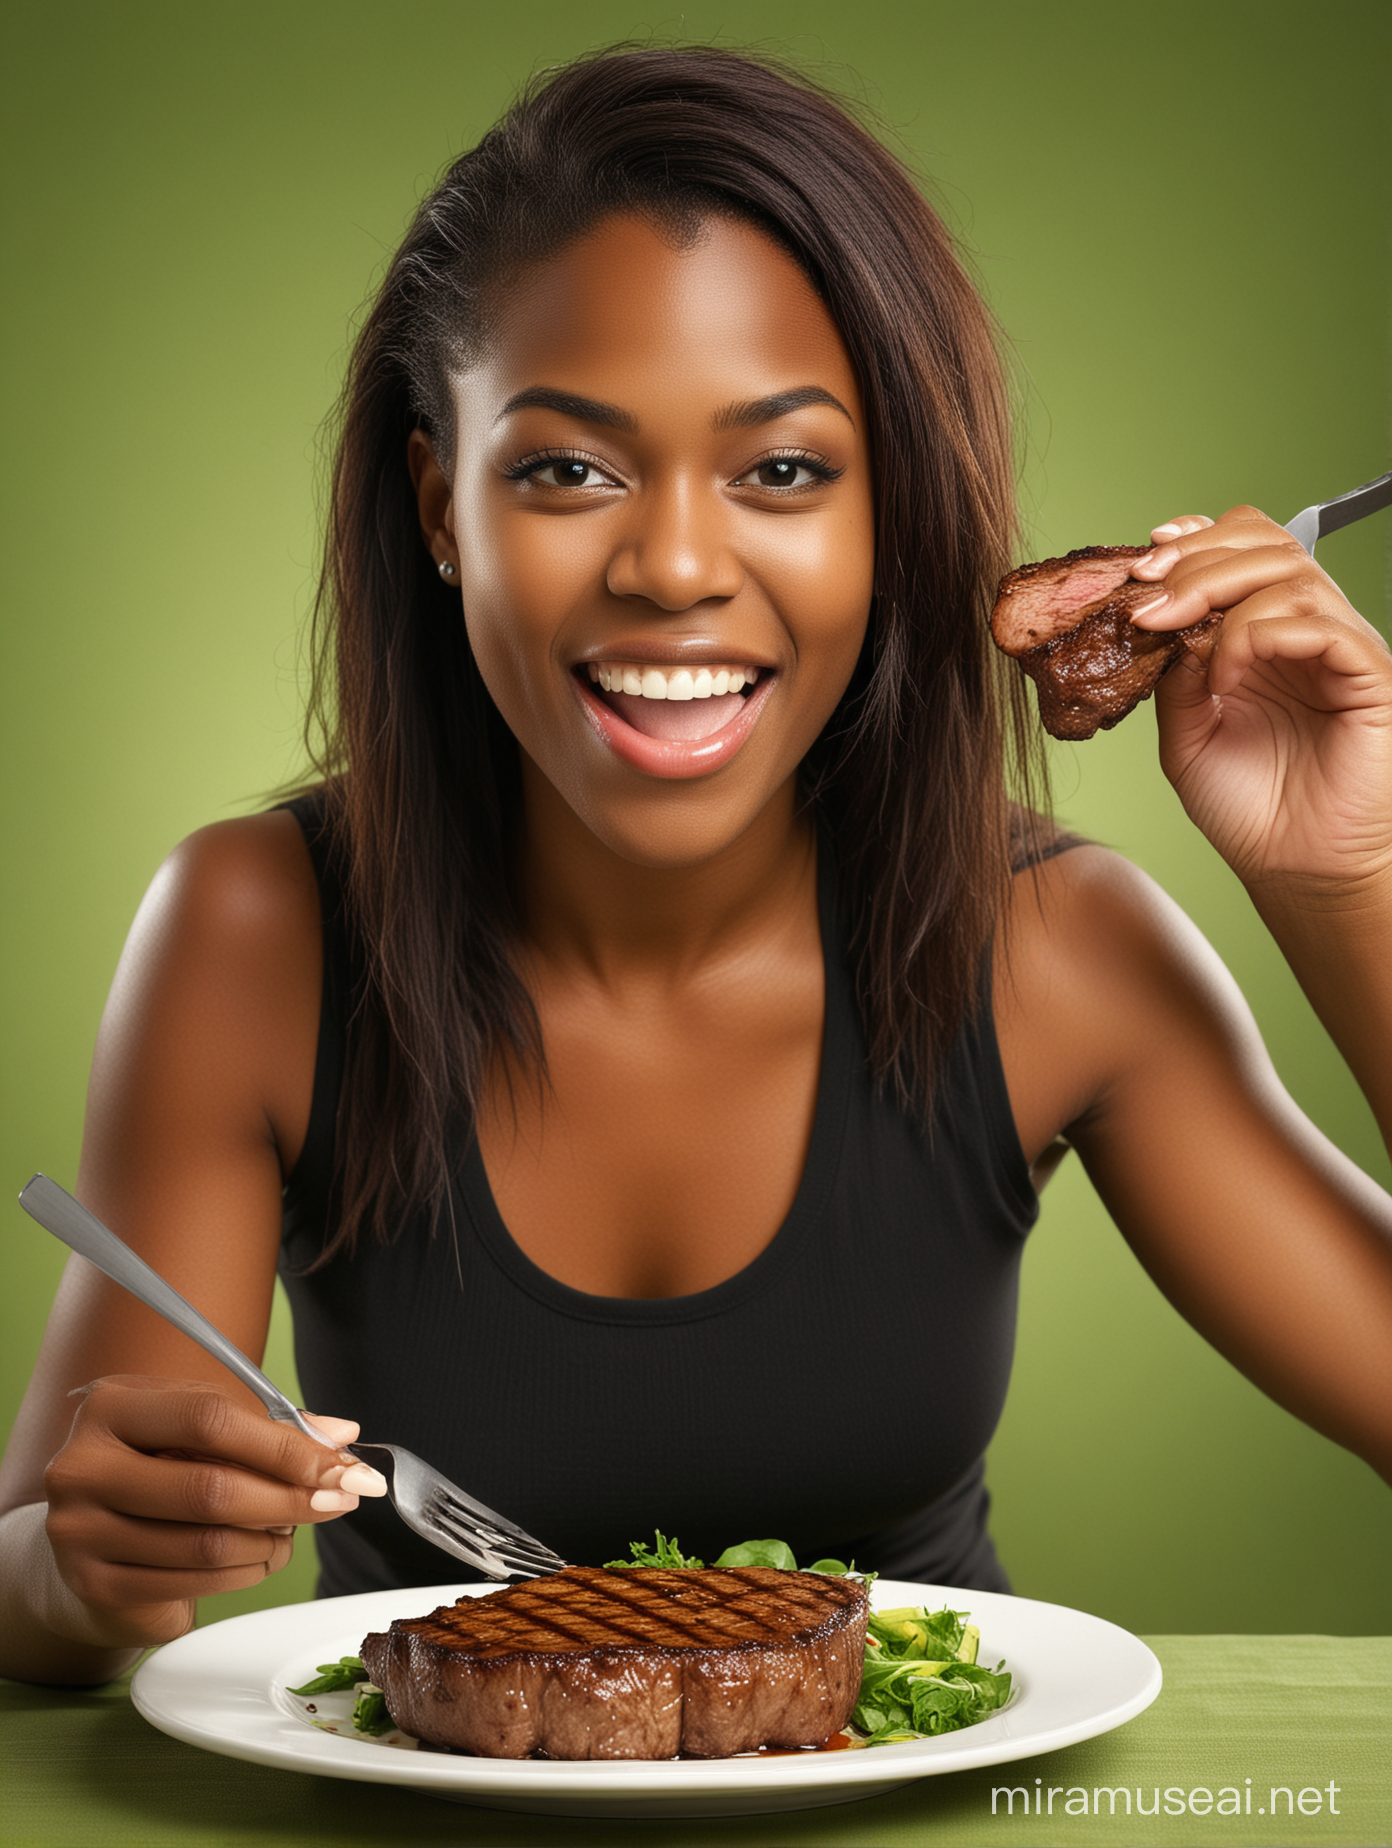 Young black happy American female eating steak.

Background: Green Plain Background, sharp lights, sharp shadows, sharp highlights. Vibrant food colors. 

Mood: Subject is enjoying and happy.